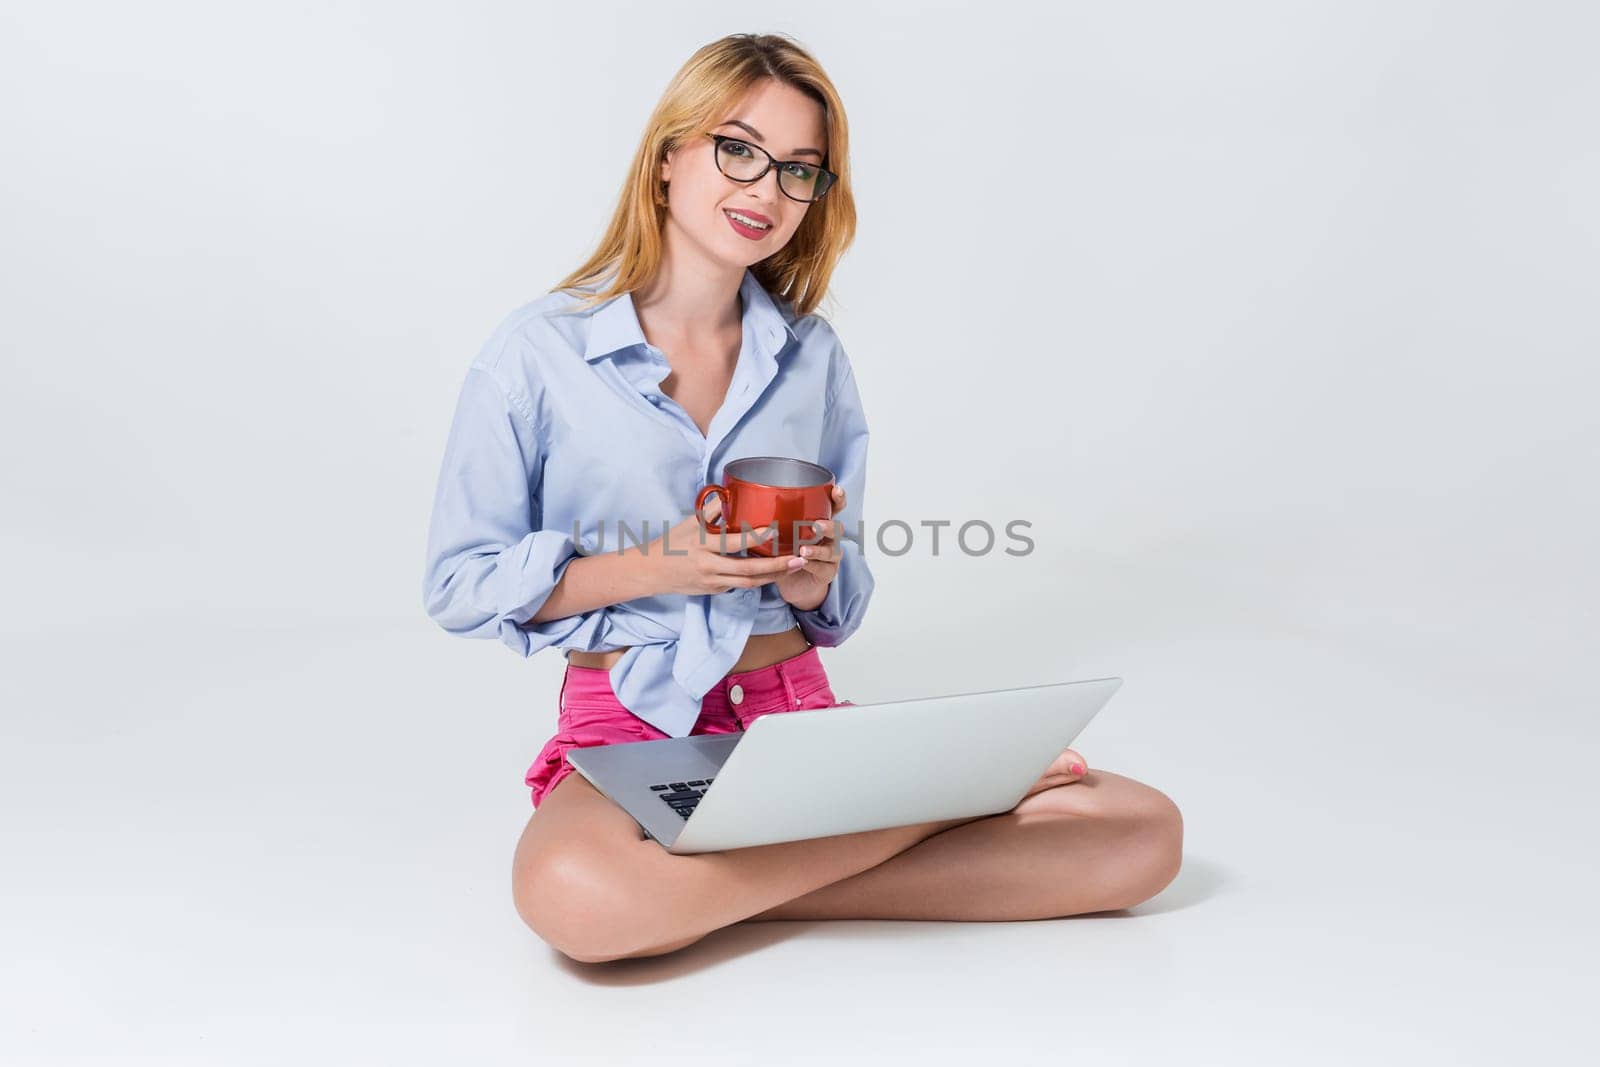 young woman sitting on the floor with crossed legs and using laptop on white background. satisfied, pleased, happy, smiling and looking at the camera, holding a cup in his hands